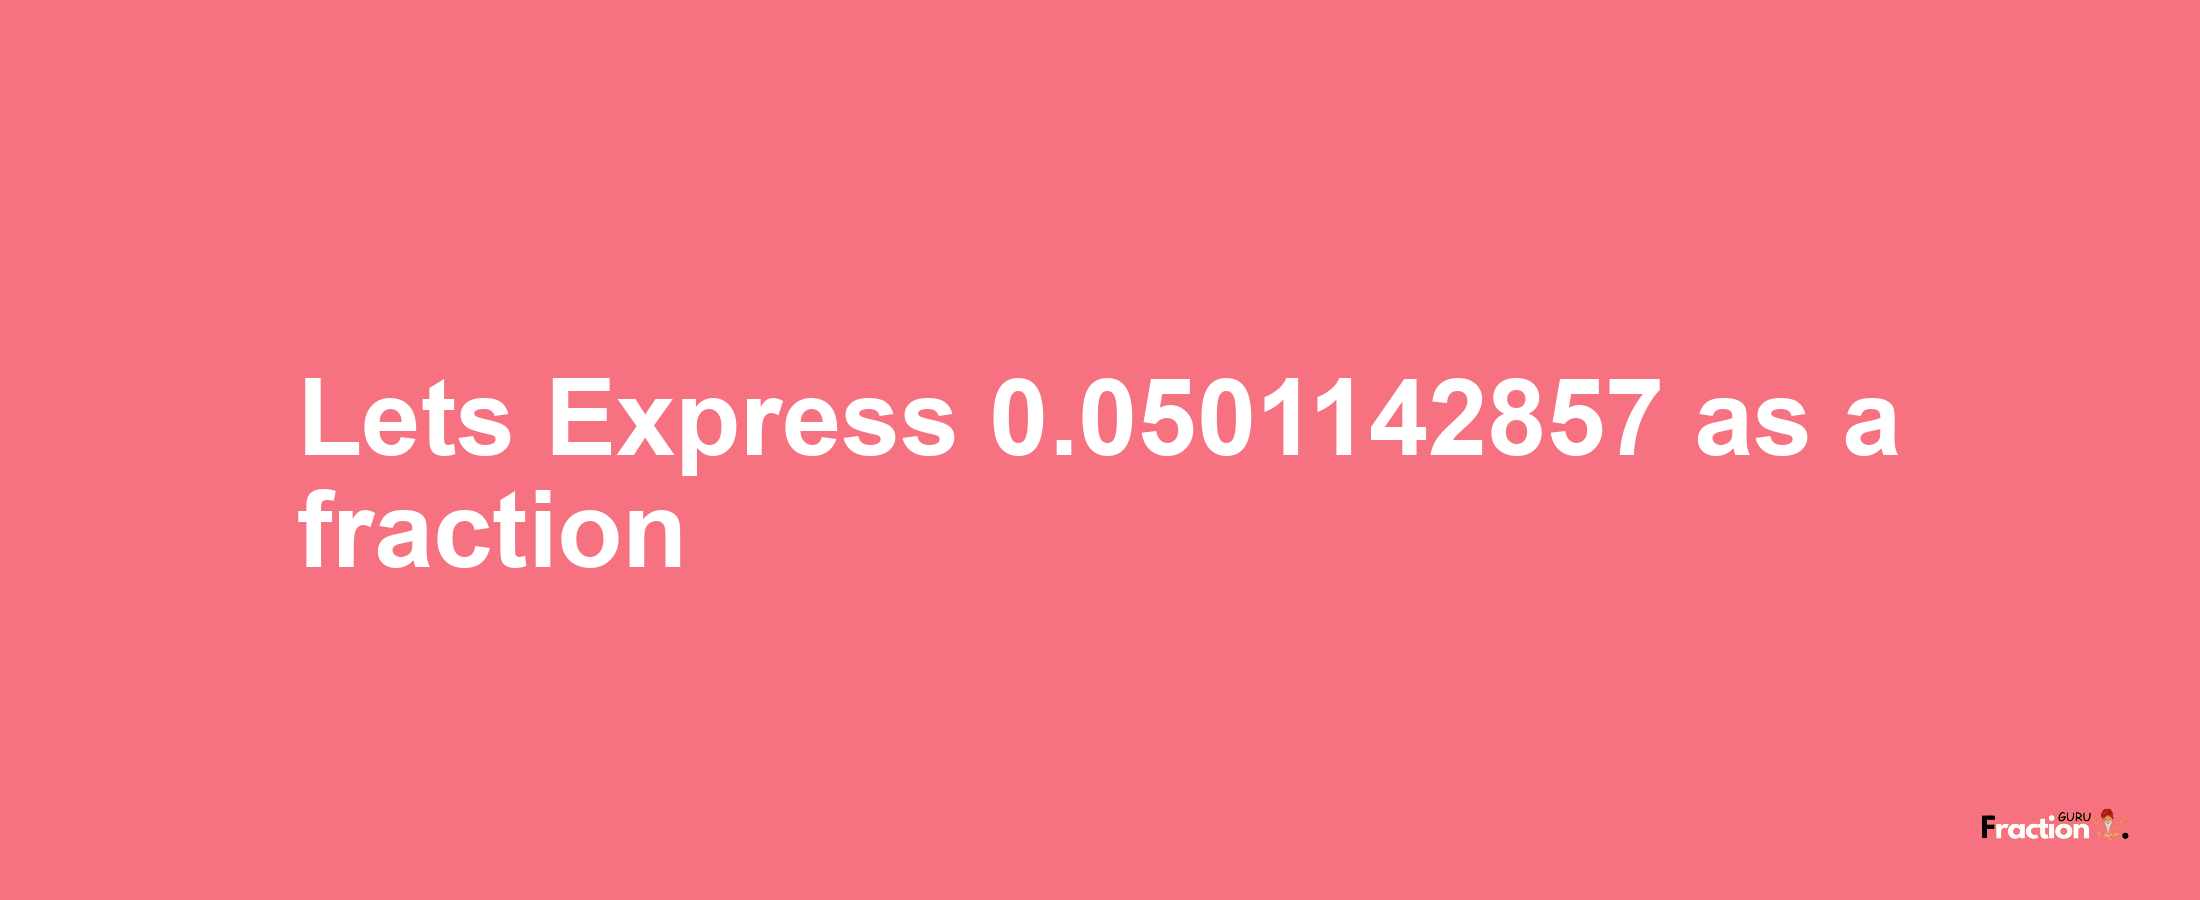 Lets Express 0.0501142857 as afraction